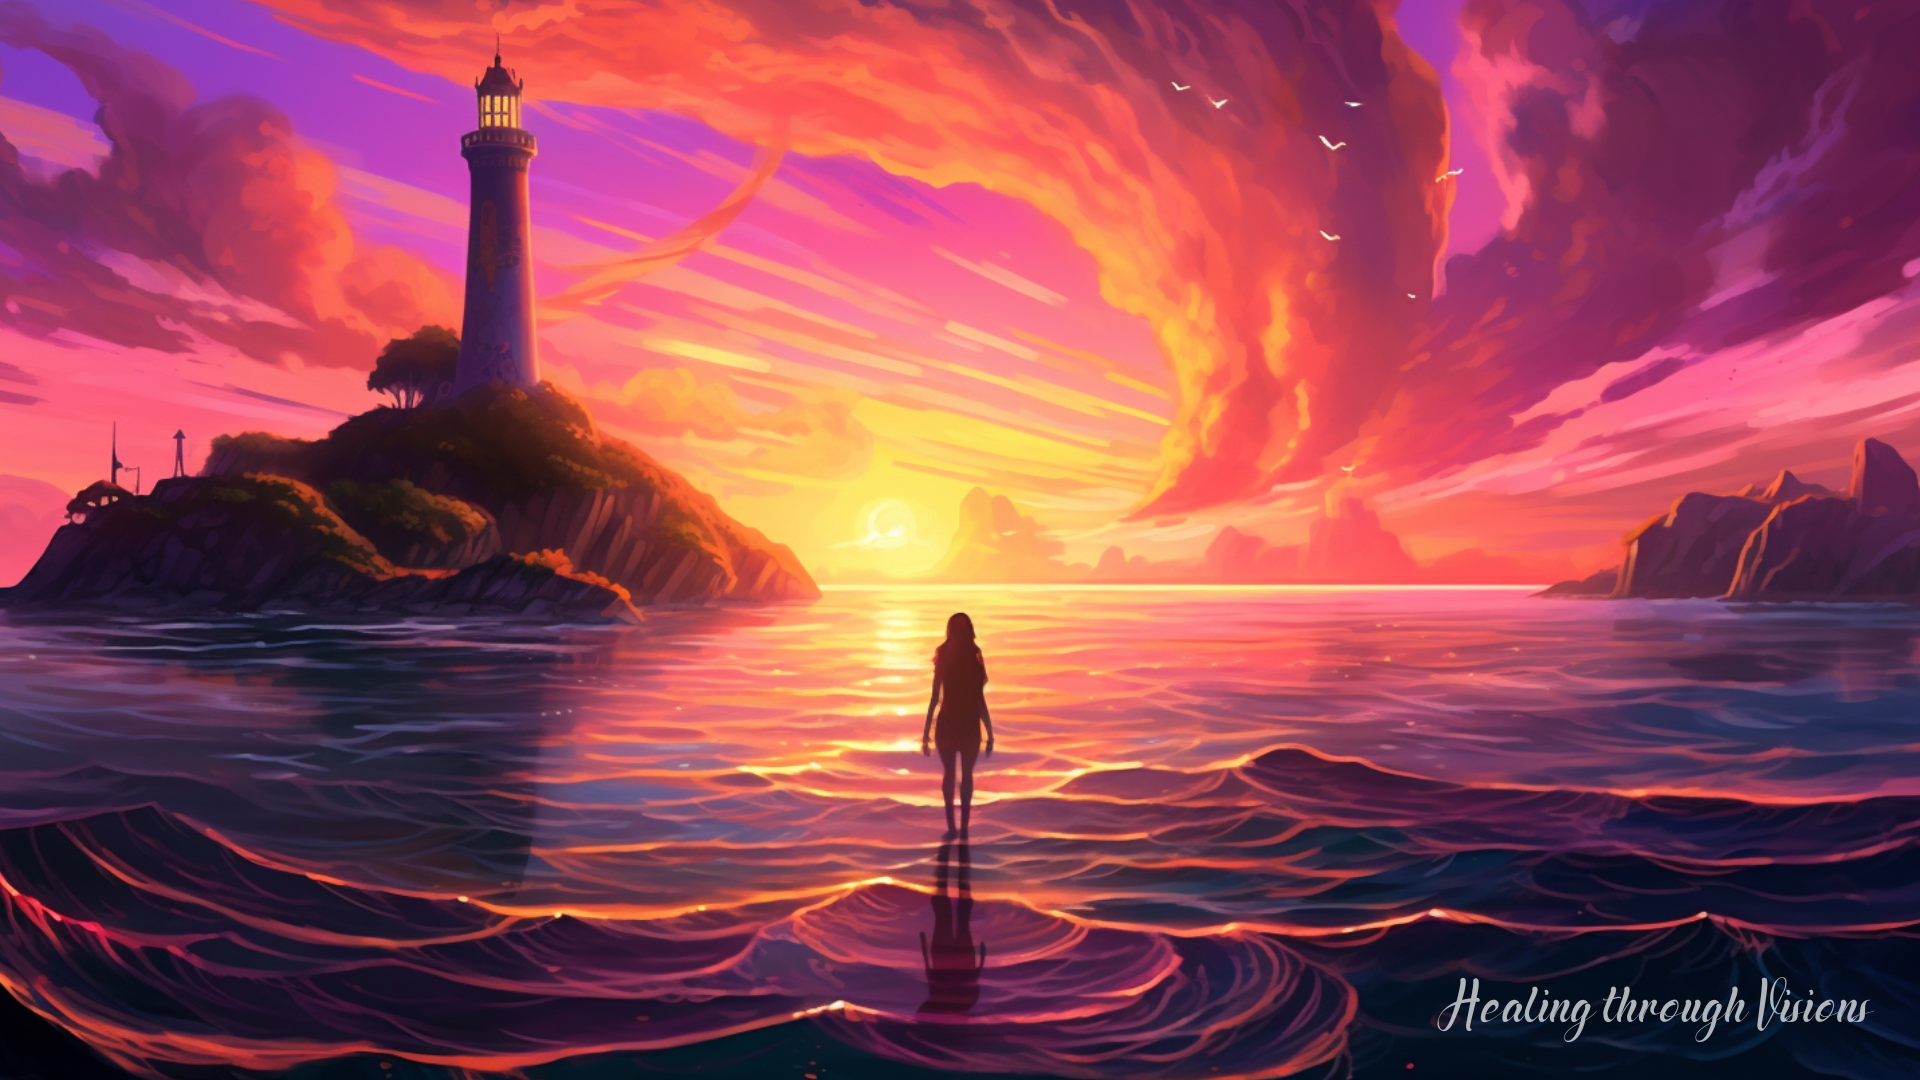 A breathtaking sunrise, with a magical and powerful futuristic lighthouse painting the sky with hues of gold, pink, and purple, casting a radiant glow upon a serene coastal landscape. The tranquil waters reflect the vibrant colors, shimmering like liquid gemstones. In the foreground, the silhouette of a Black woman shaman stands tall, embodying strength and grace, surrounded by swirling ribbons of energy that mirror the vibrant colors of the sunrise. This magical image serves as a reminder of the infinite potential that lies within, the limitless expanses waiting to be explored, and the radiant beauty that unfolds when one embraces their authentic self.